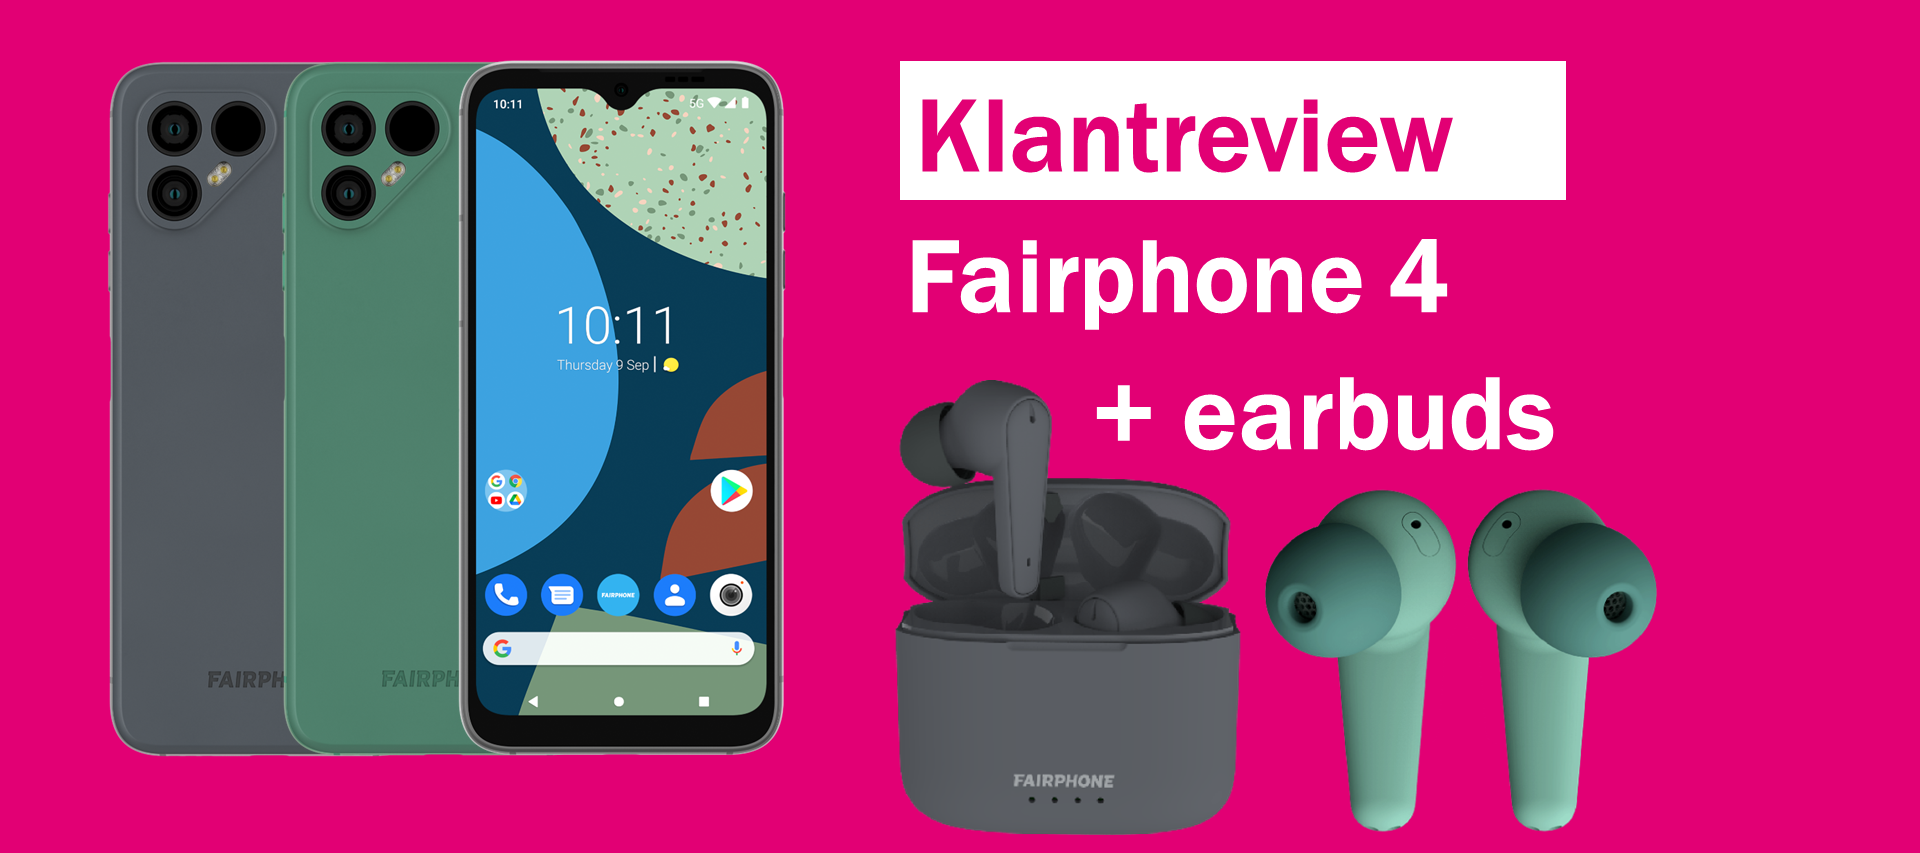 [REVIEW] Fairphone 4 + earbuds